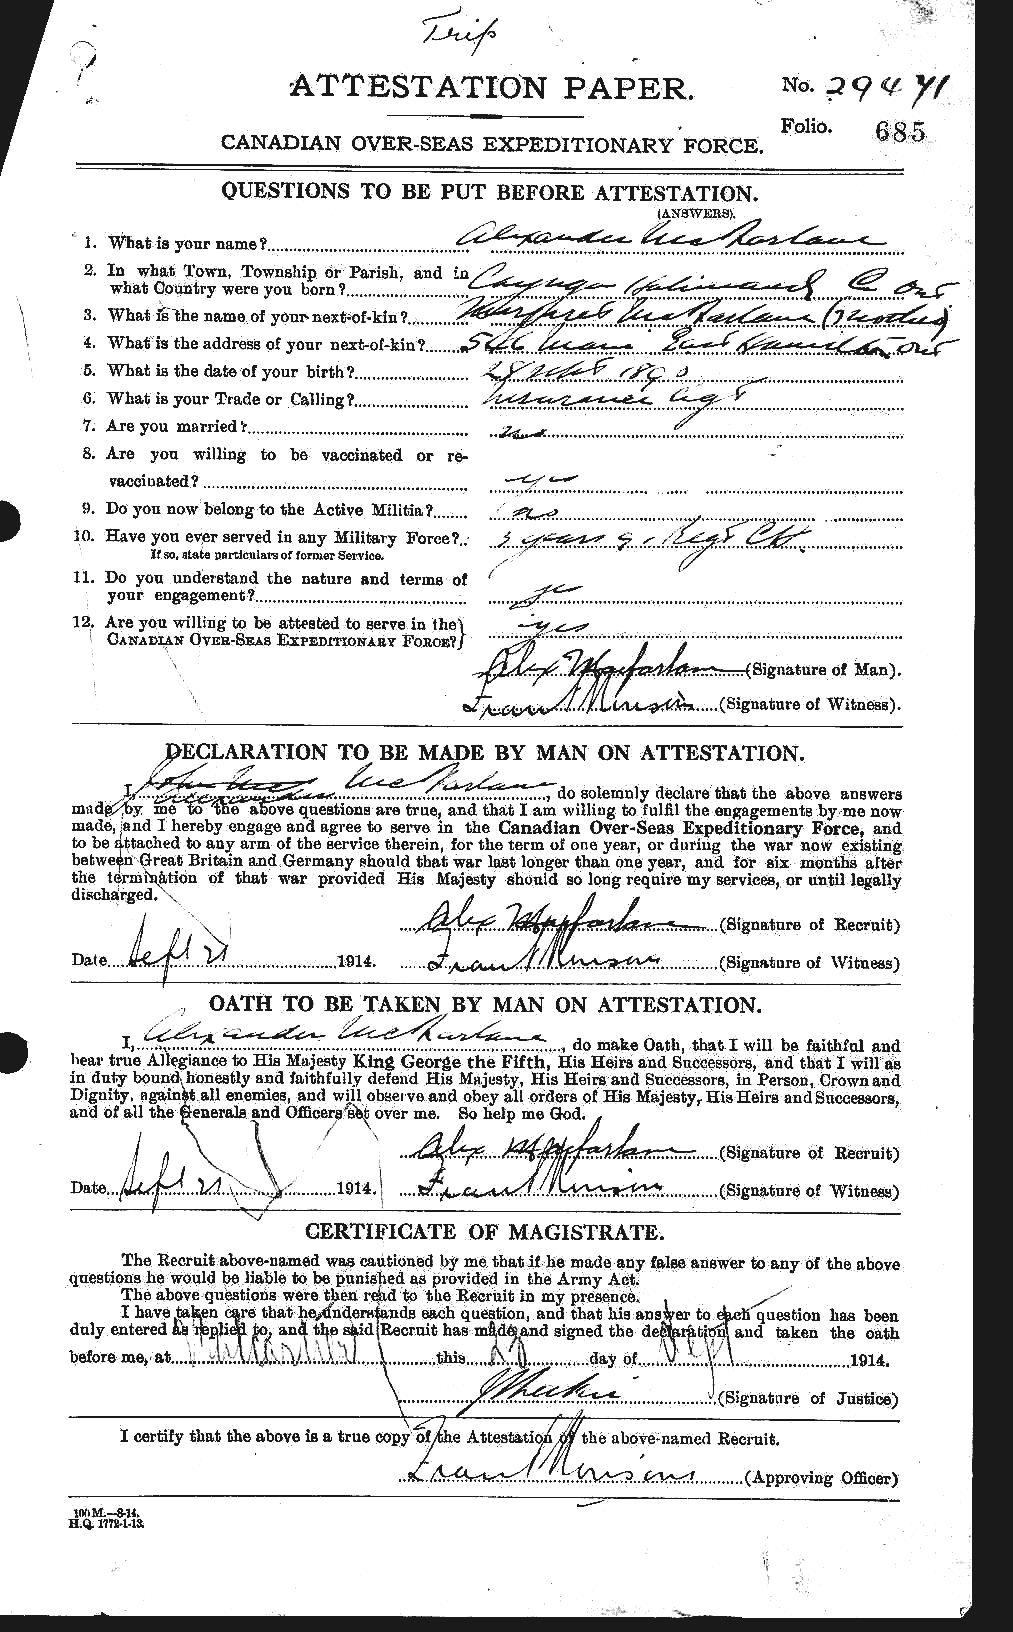 Personnel Records of the First World War - CEF 521692a